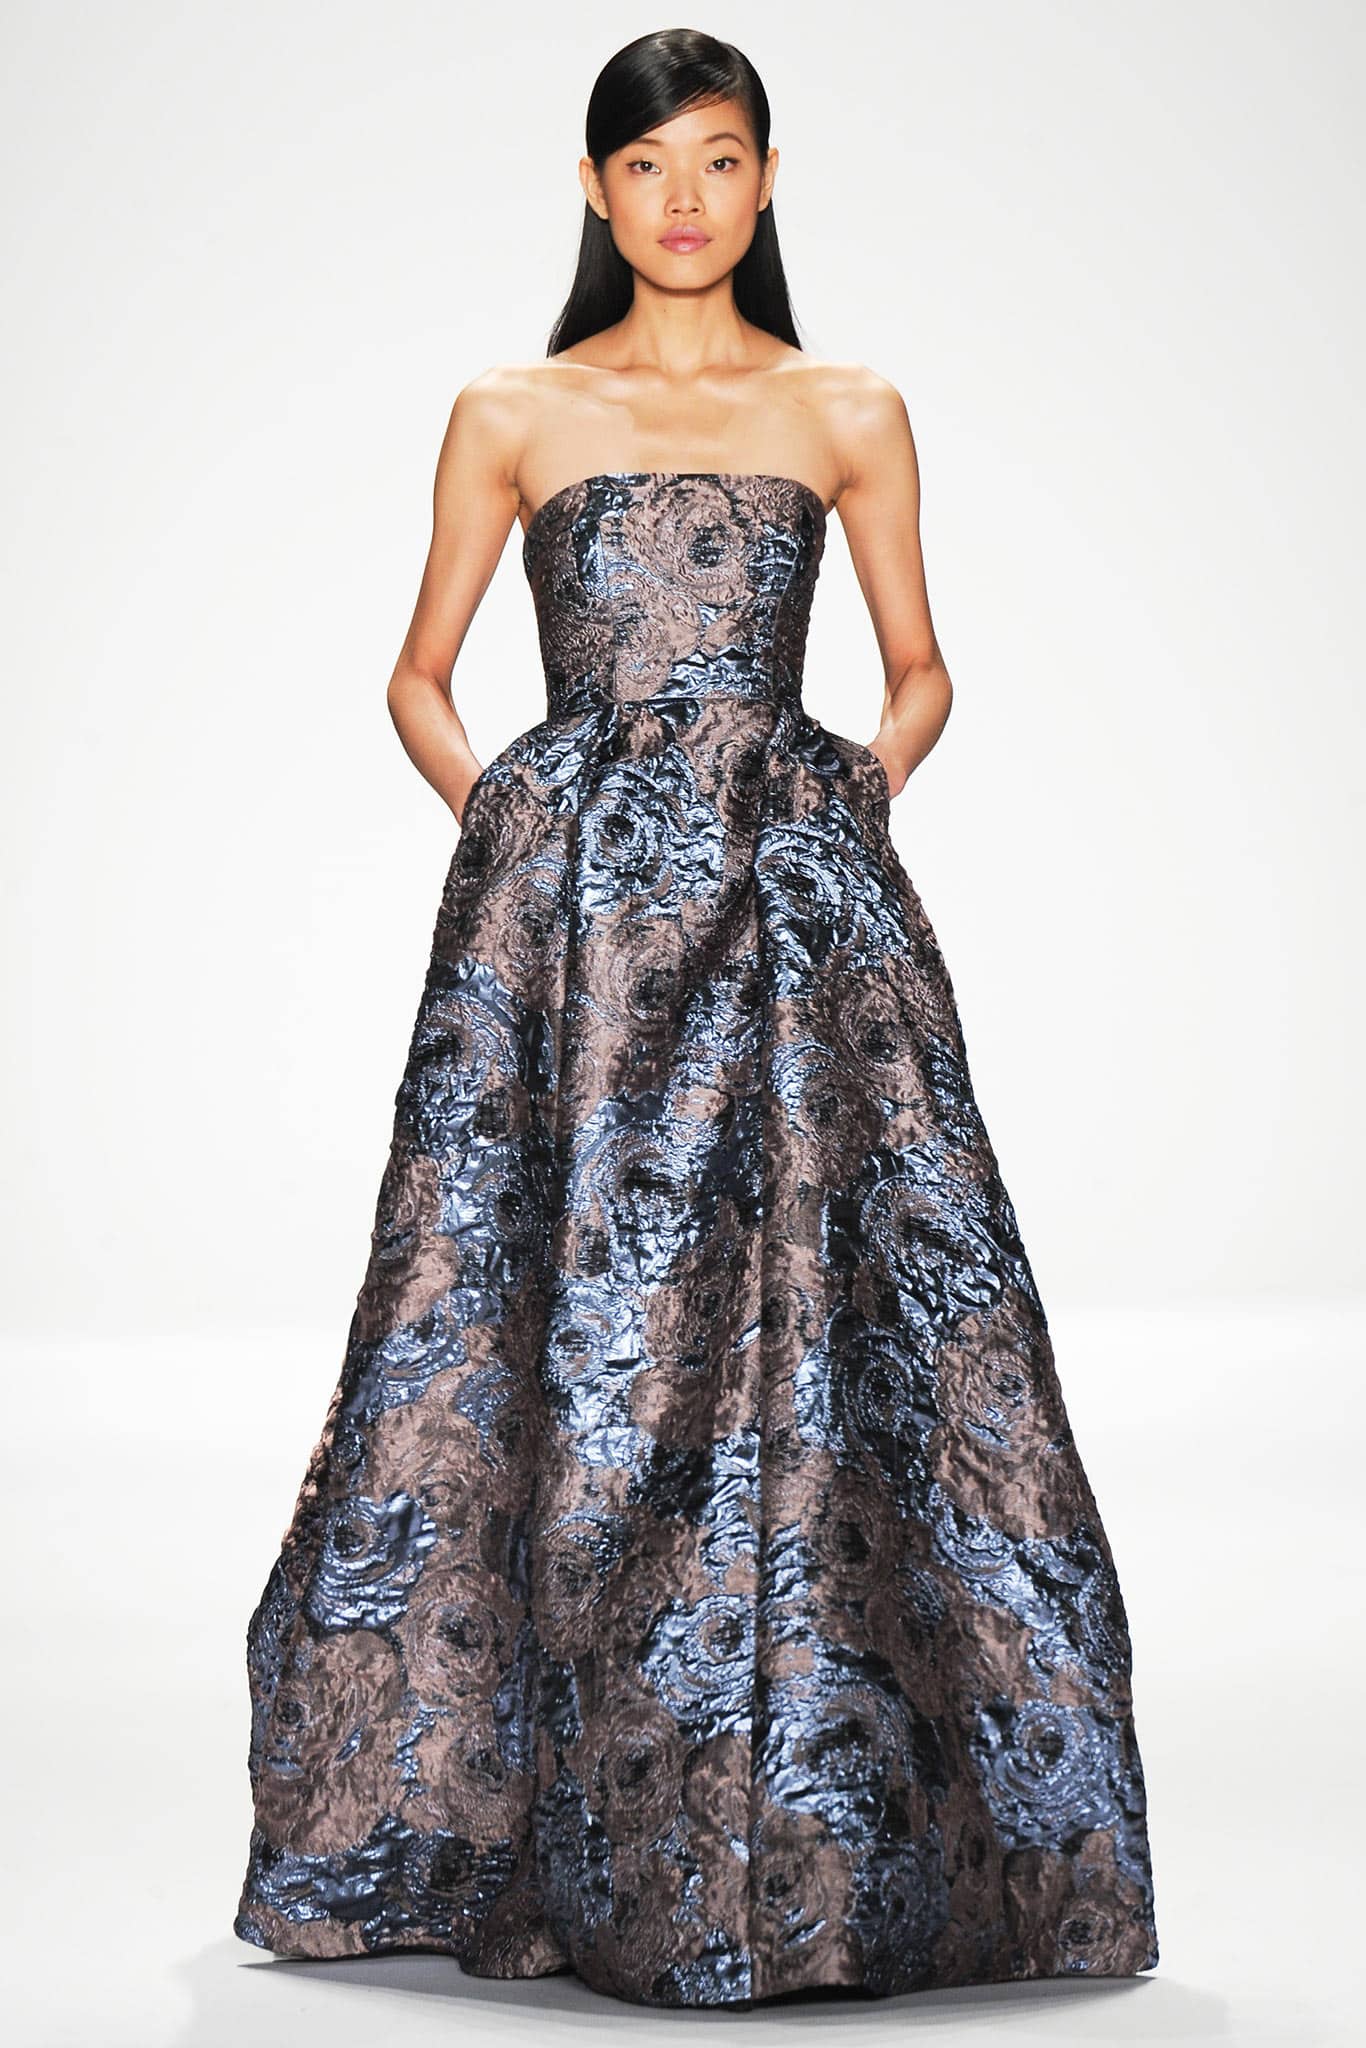 blue-silver-floral-quilted-strapless-evening-dress-gowns-fall2014-badgleymischka-cococozy